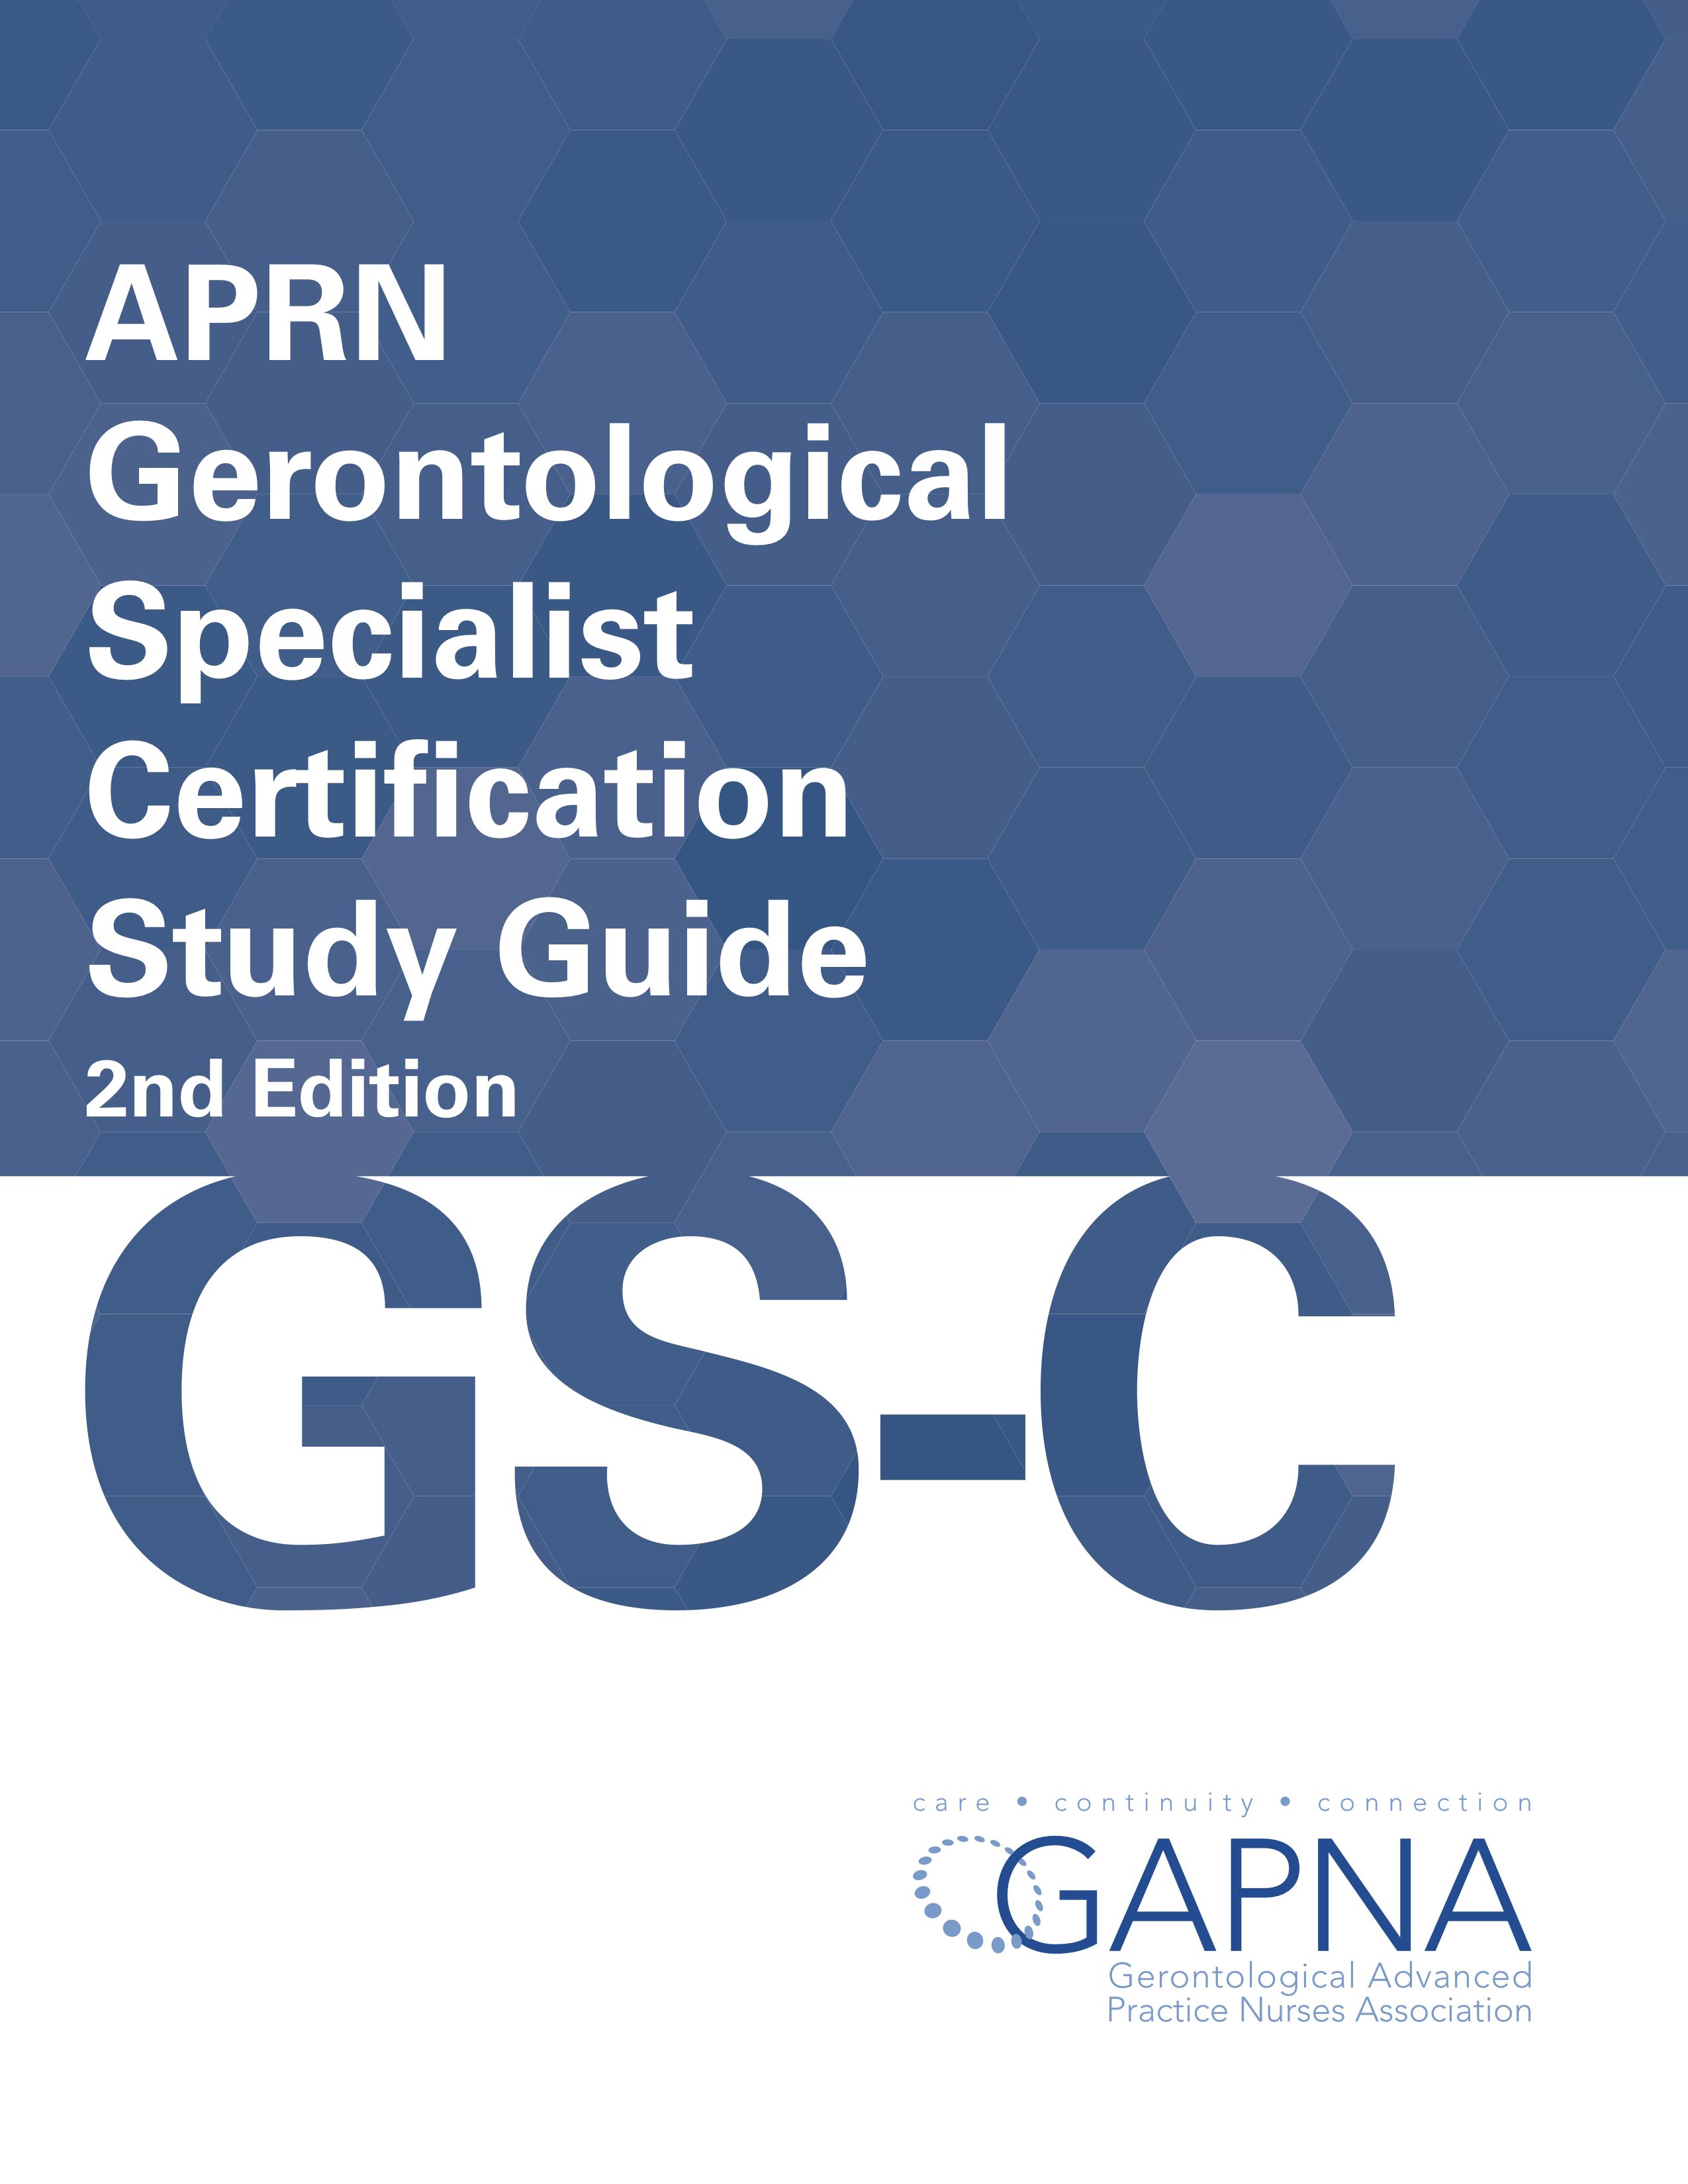 APRN Gerontological Specialist Certification Study Guide 2nd Edition